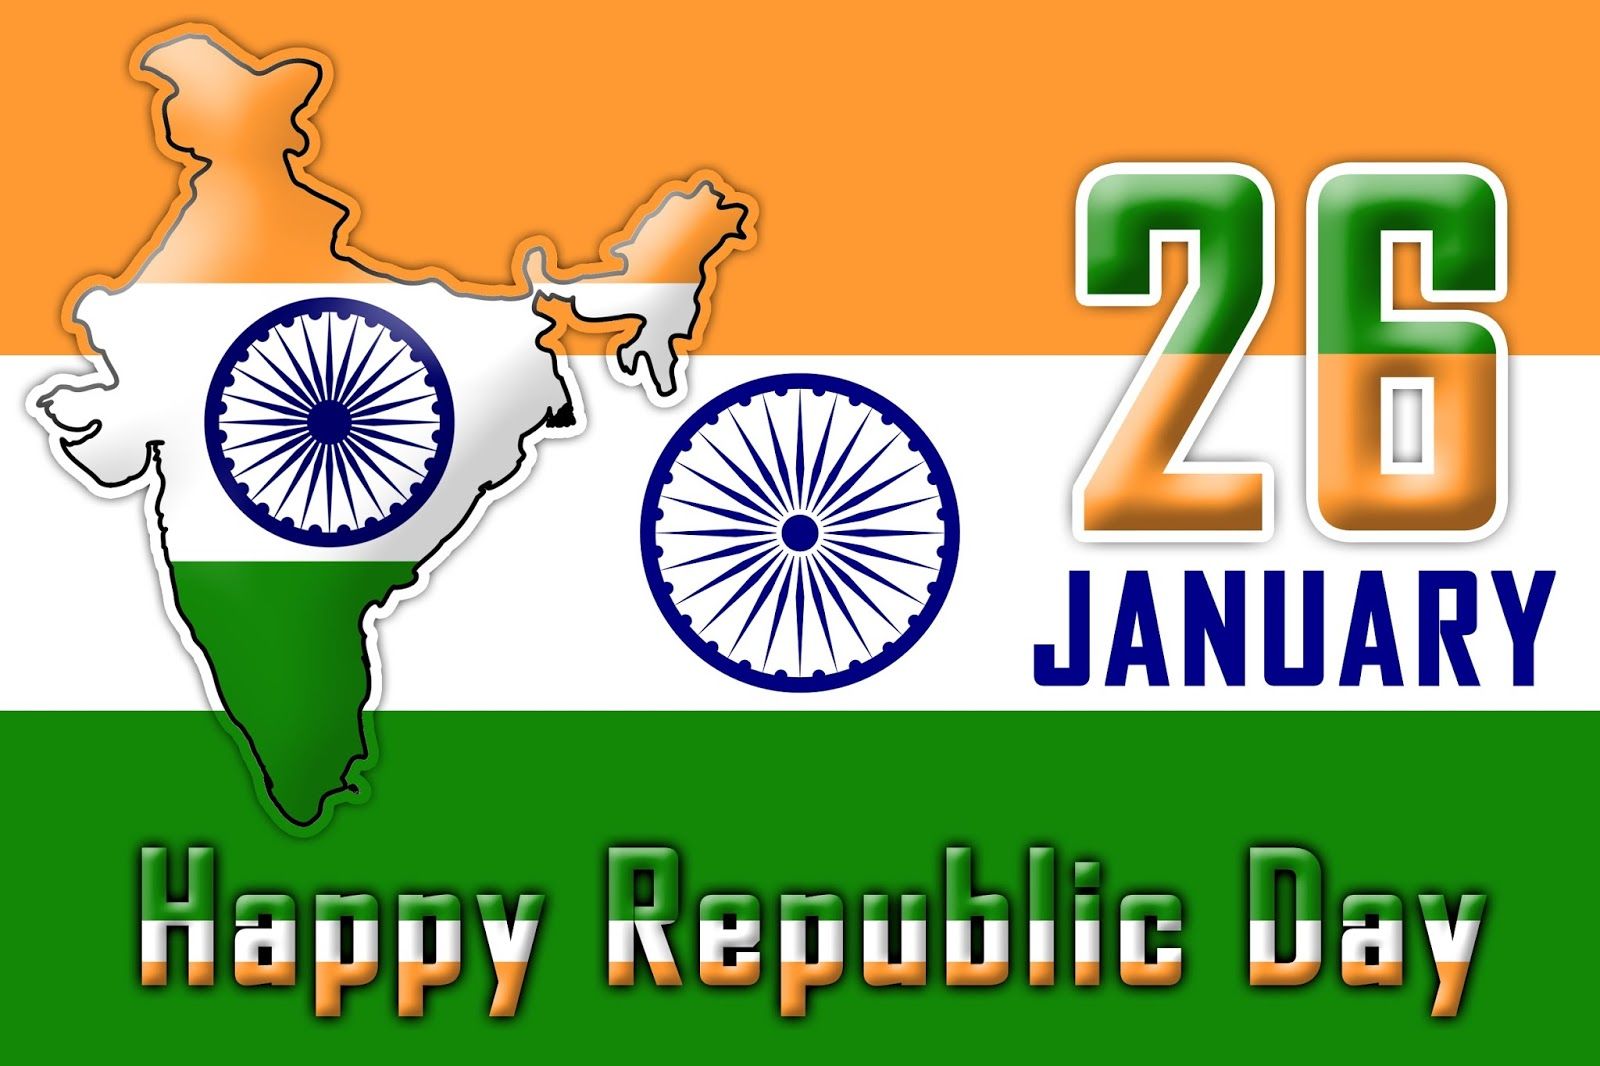 January Republic Day Shayari Image, Picture Happy Republic Day 2021 Image, Quotes, Speech, Poems, Slogans